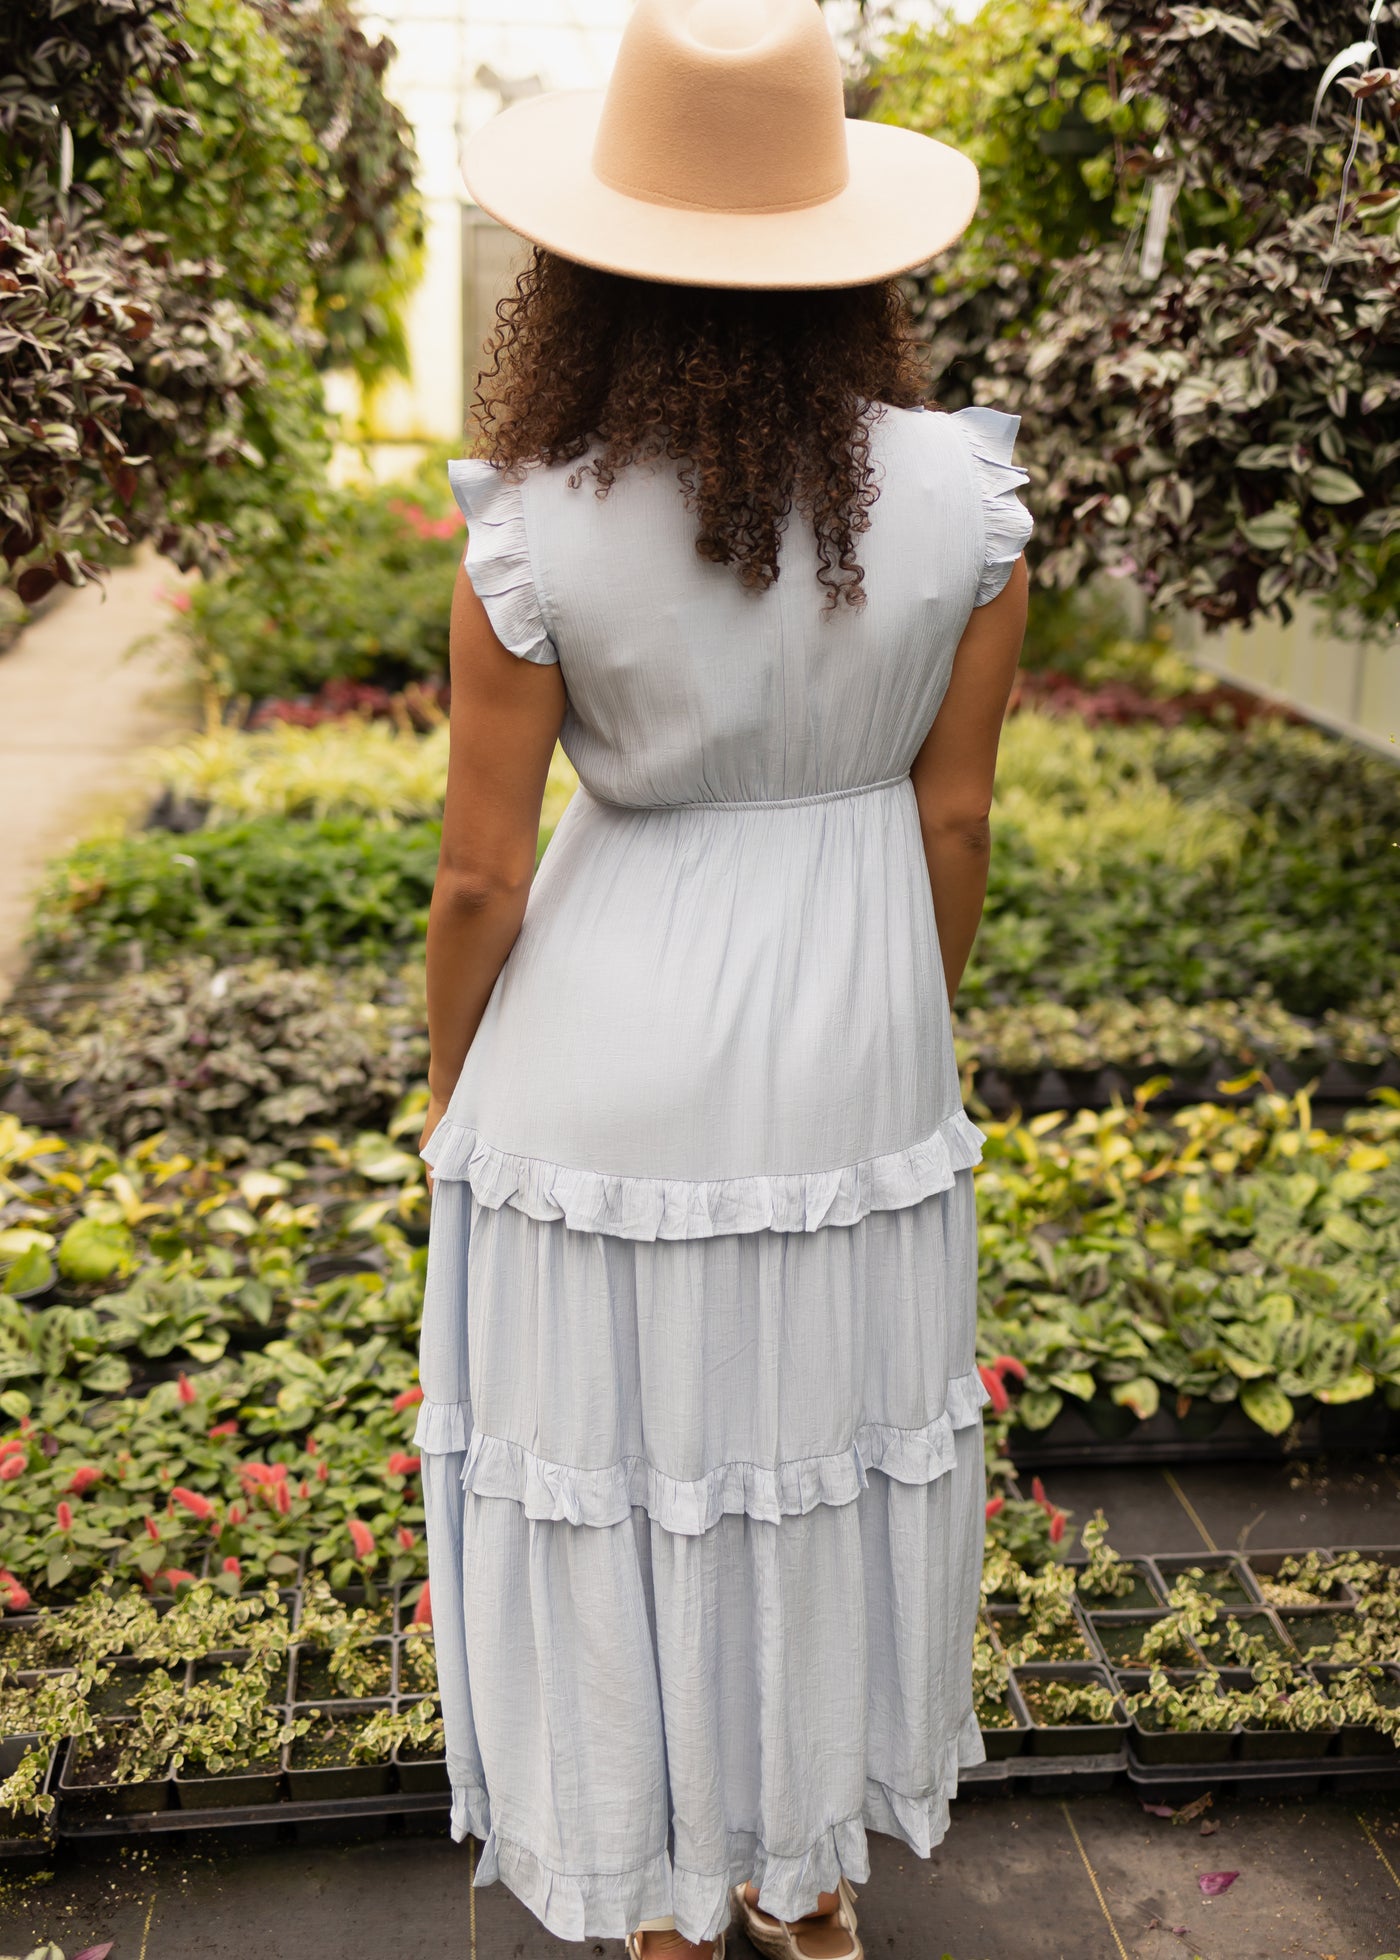 Back view of a baby blue dress with ruffles on the bodice